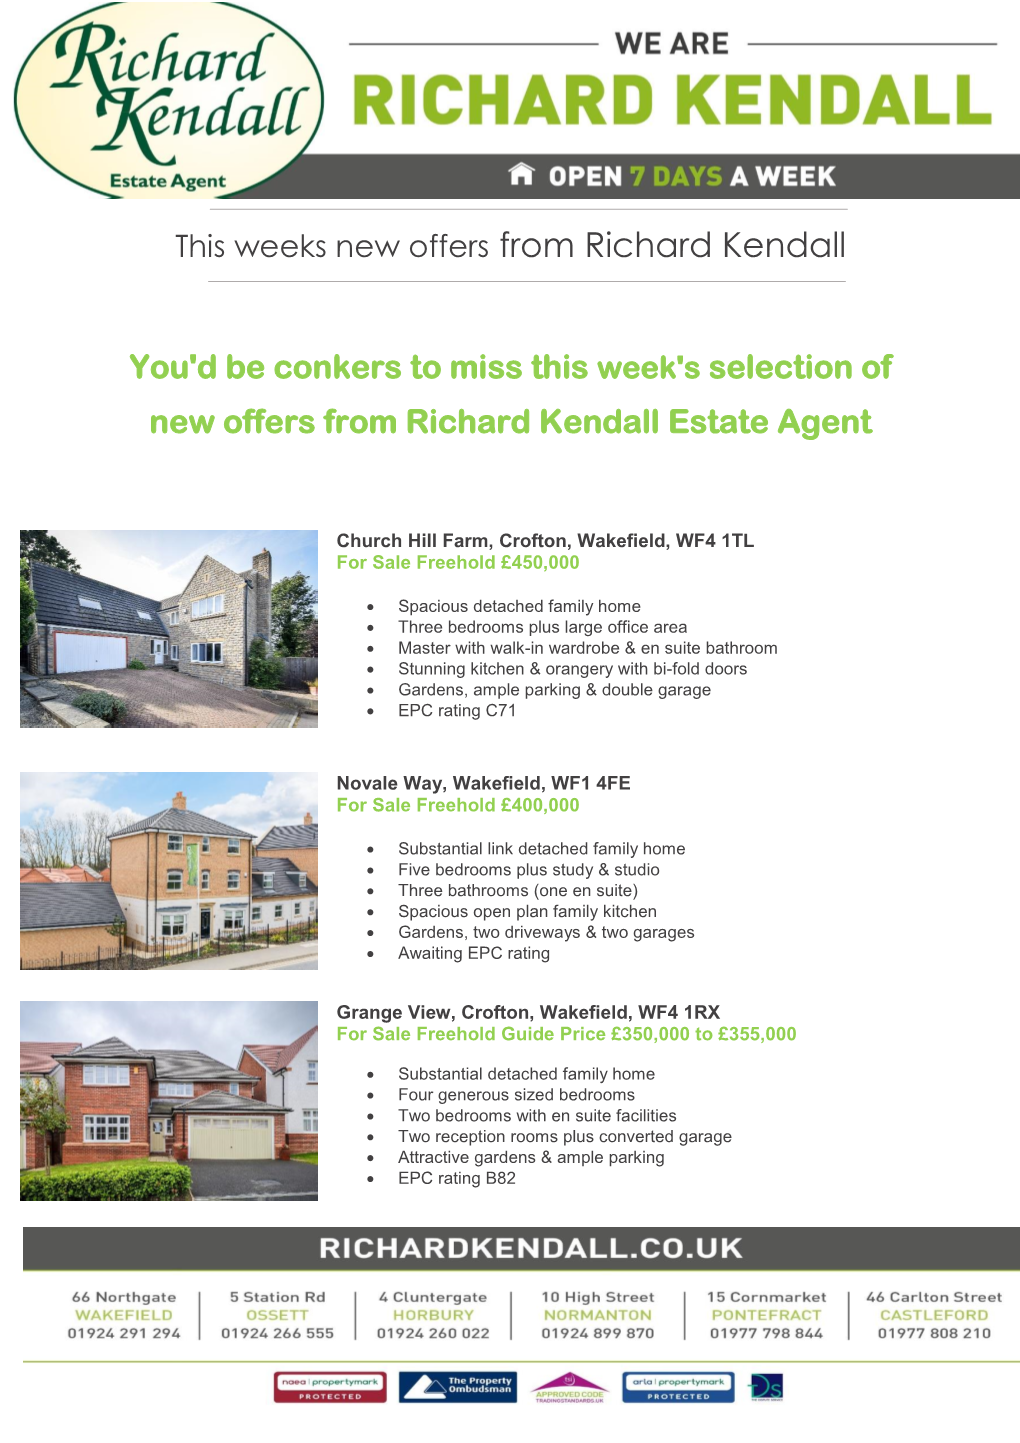 You'd Be Conkers to Miss This Week's Selection of New Offers from Richard Kendall Estate Agent